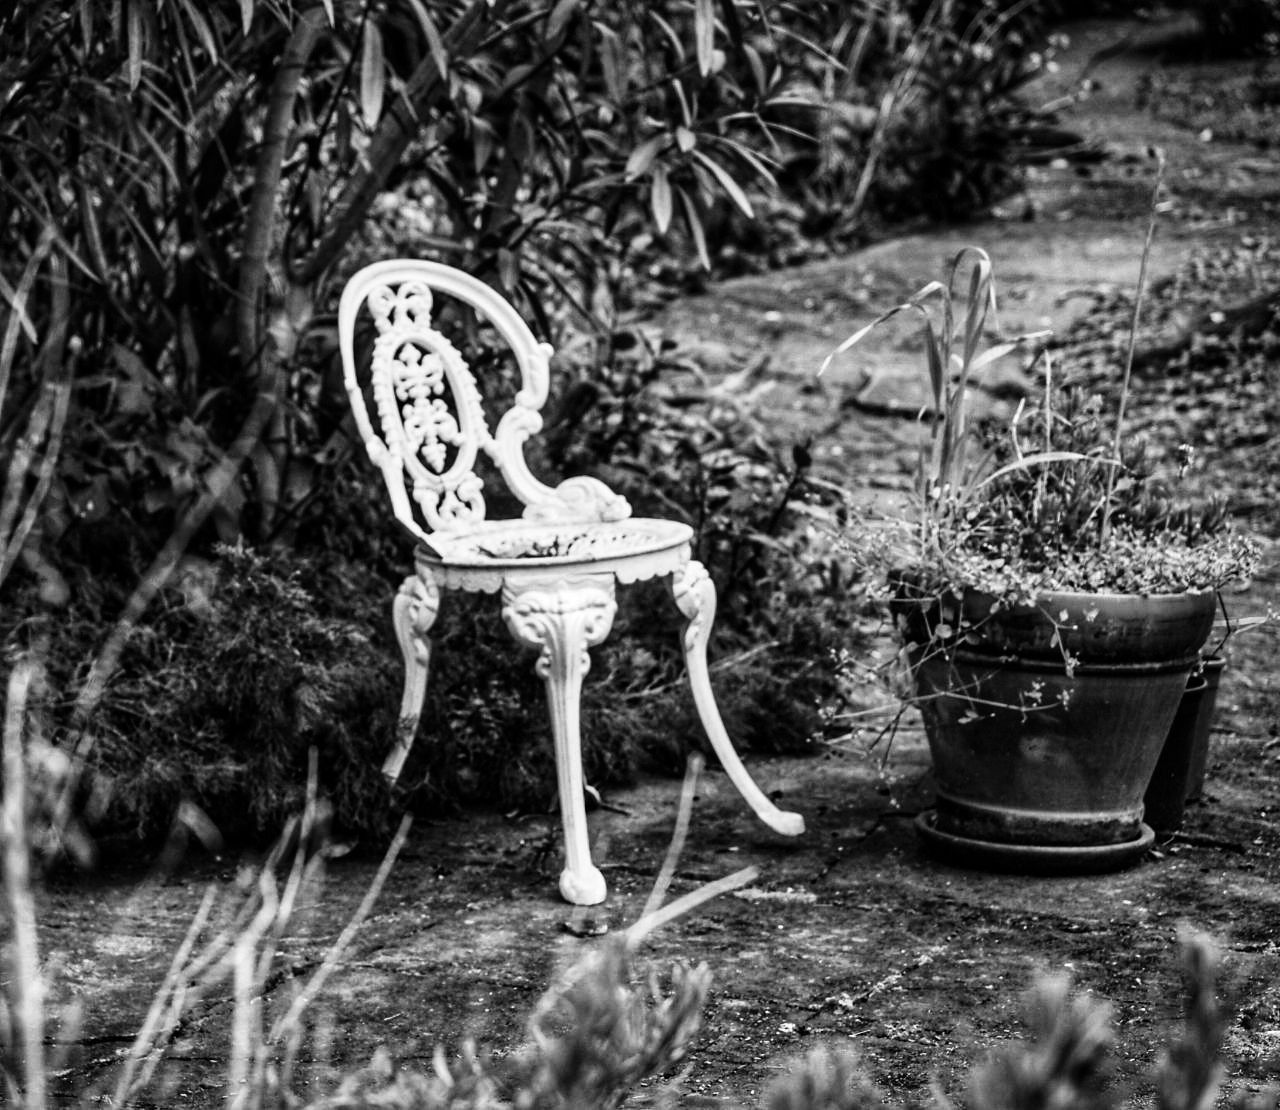 plant, black and white, nature, seat, monochrome photography, no people, monochrome, growth, day, grass, chair, outdoors, white, land, tree, field, front or back yard, furniture, black, absence